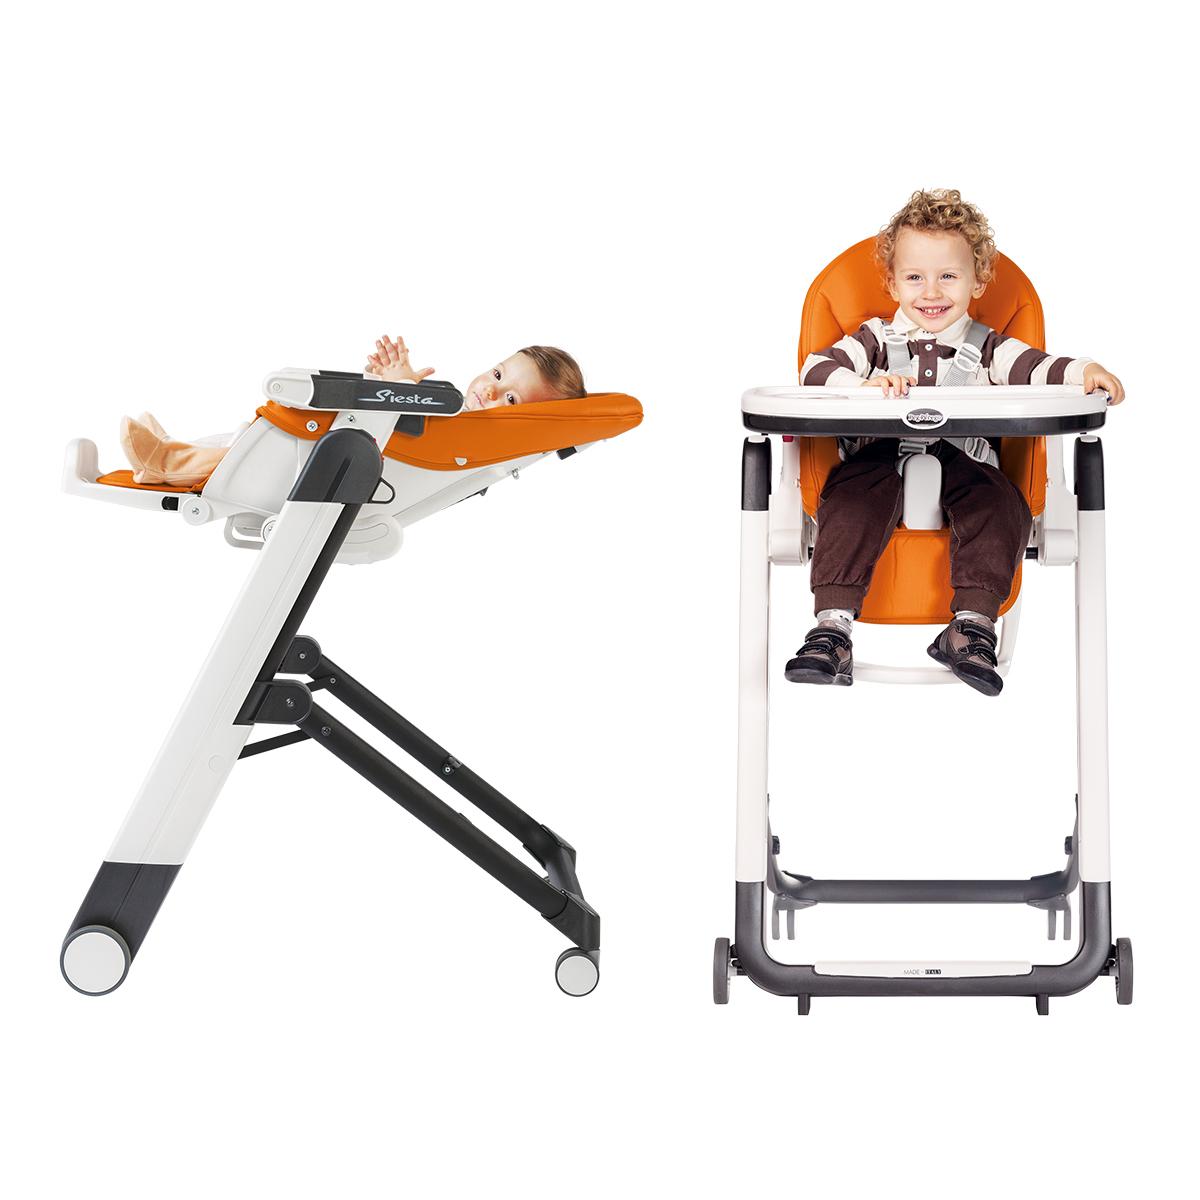 Is the Peg Perego Siesta High Chair as Good as They Say it Is?